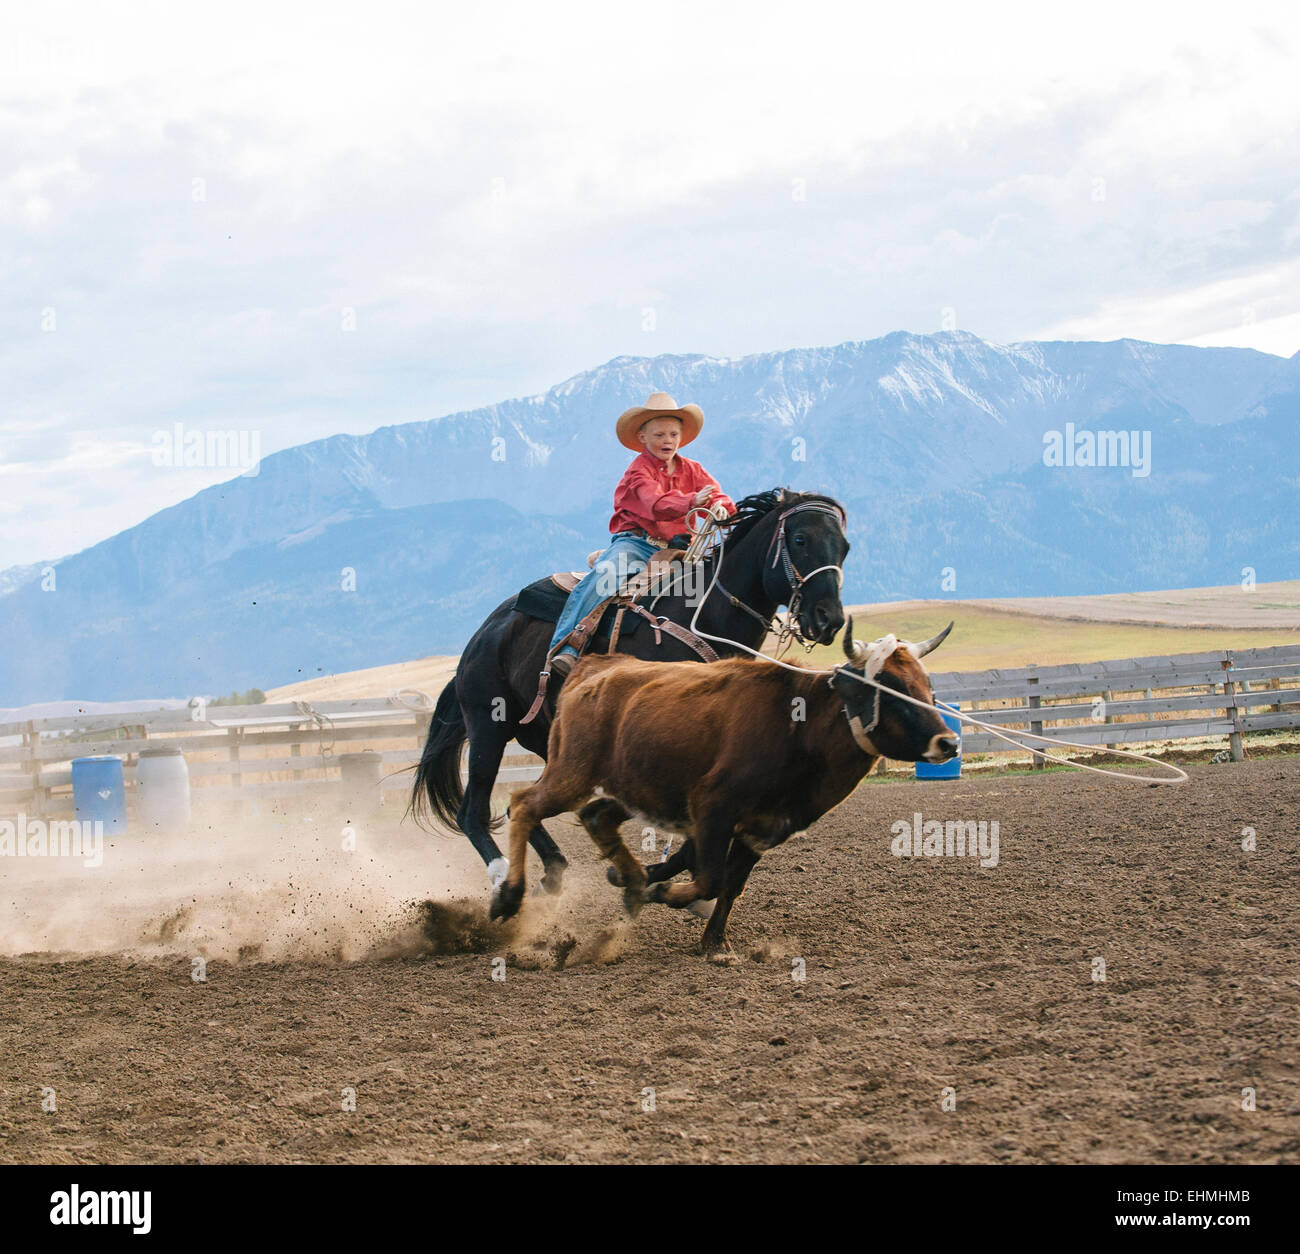 Caucasian boy chasing cattle at rodeo Stock Photo